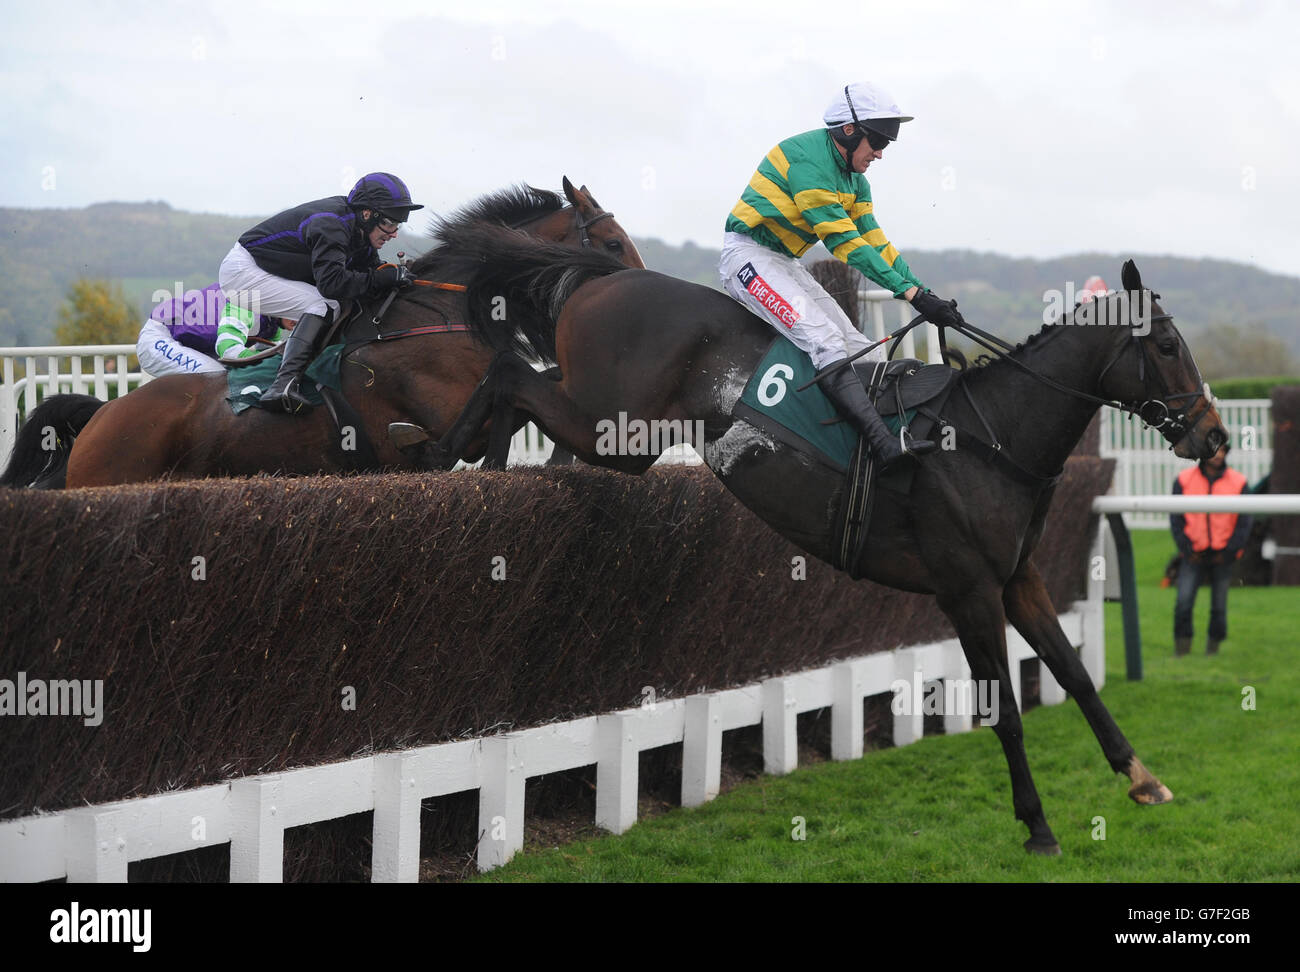 Dursey Sound ridden by Barry Geraghty runs in The Showcase Trophy during day two of the 2014 Showcase meeting at Cheltenham Racecourse, Cheltenham. Stock Photo